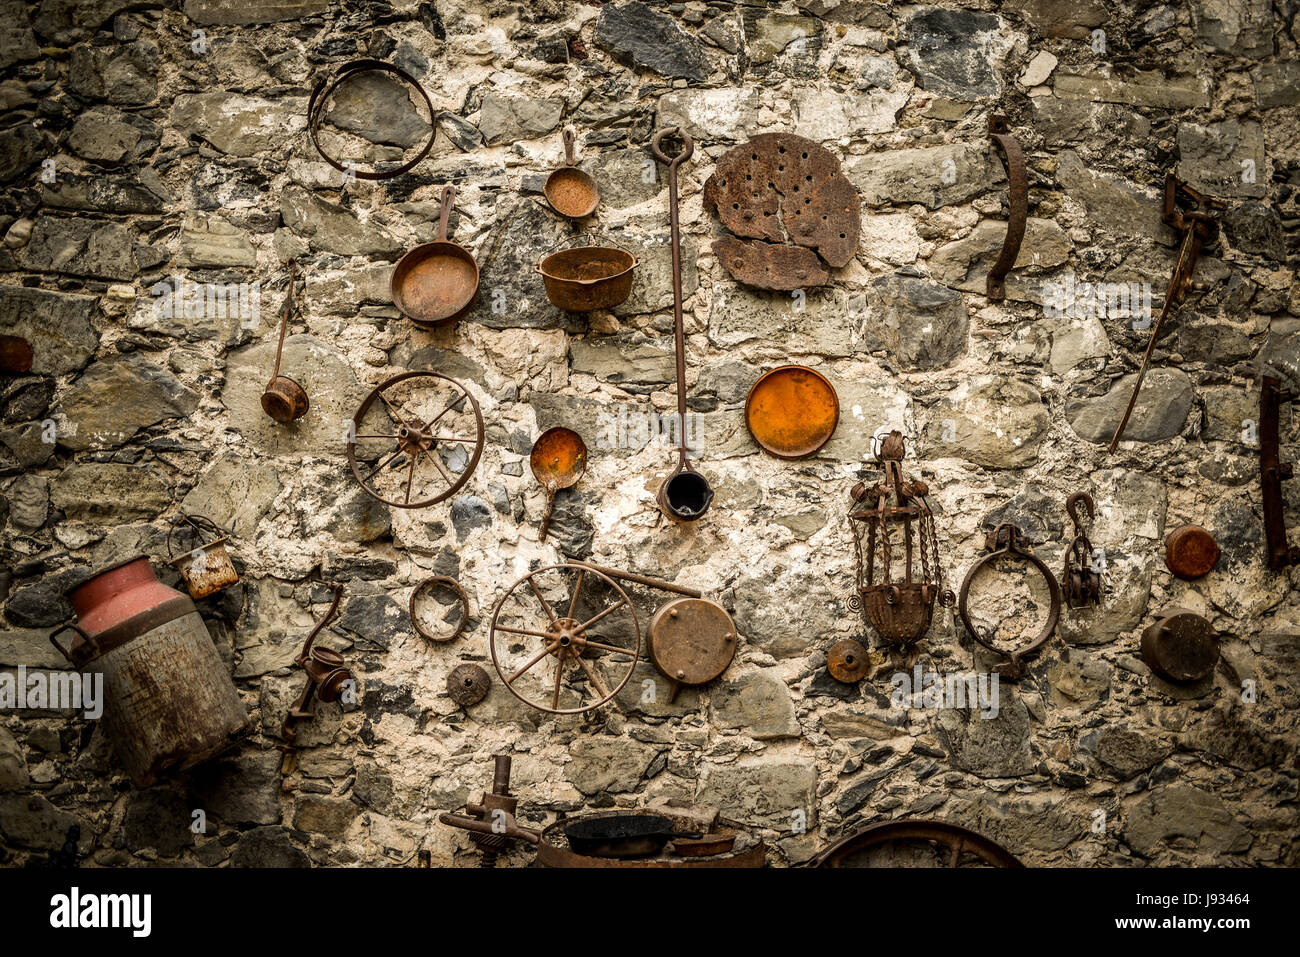 Medieval style rock wall with metallic ornaments. Stock Photo